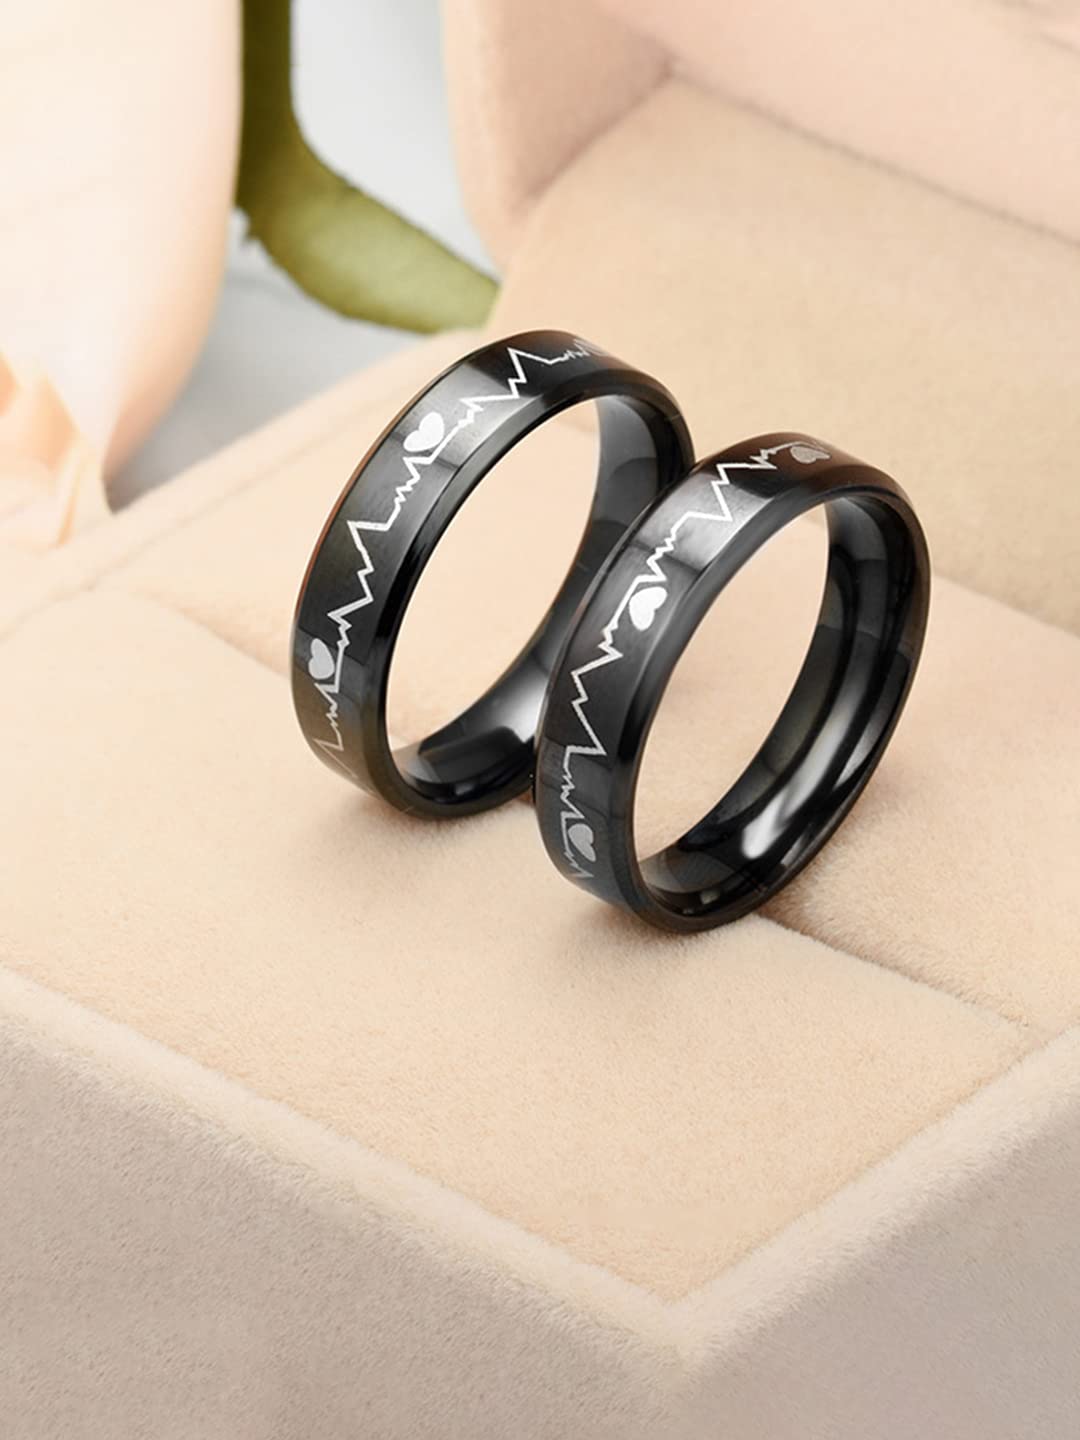 Buy Black Sun and Moon Ring 6MM Stainless Steel Couple Rings for Engagement  Wedding Anniversary, stainless-steel at Amazon.in